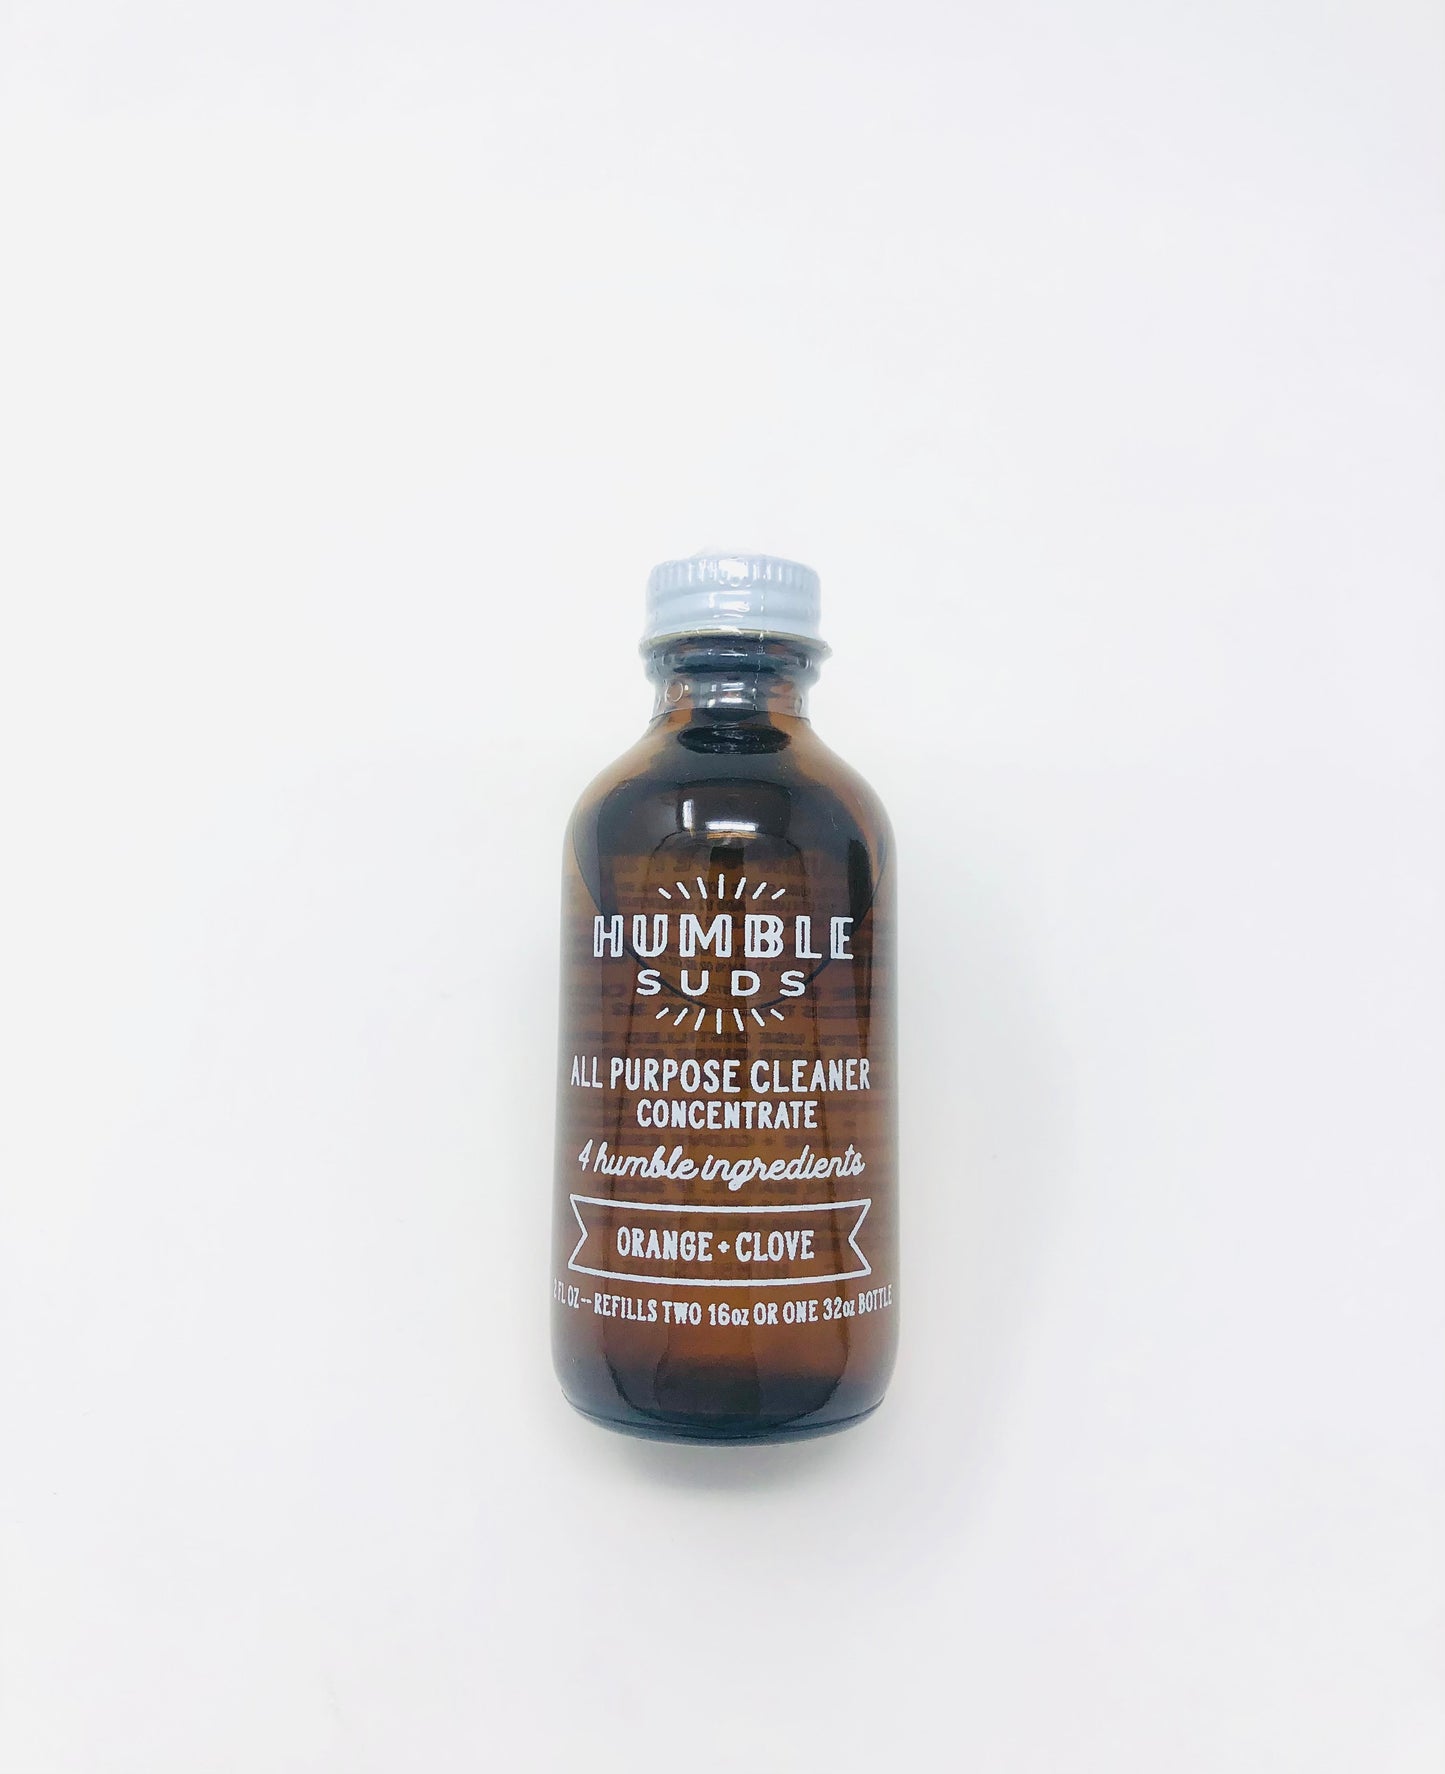 All-Purpose Cleaner Concentrate by Humble Suds